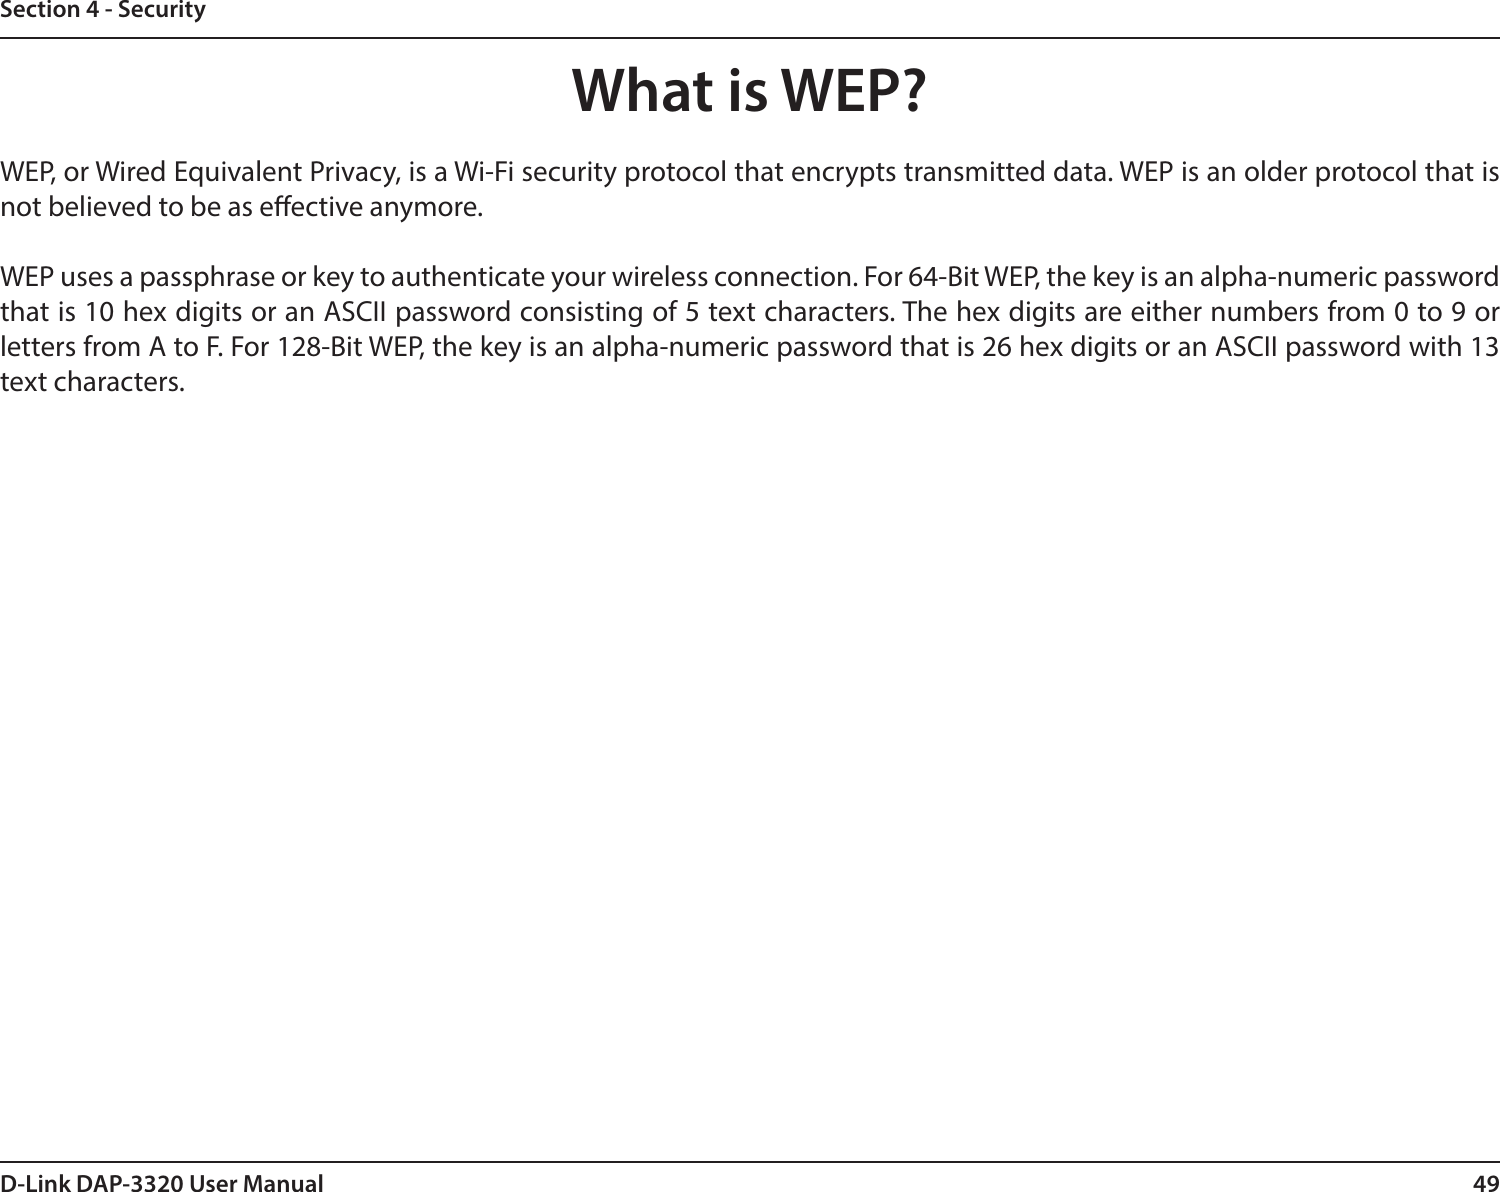 49D-Link DAP-3320 User ManualSection 4 - SecurityWhat is WEP?WEP, or Wired Equivalent Privacy, is a Wi-Fi security protocol that encrypts transmitted data. WEP is an older protocol that is not believed to be as eective anymore. WEP uses a passphrase or key to authenticate your wireless connection. For 64-Bit WEP, the key is an alpha-numeric password that is 10 hex digits or an ASCII password consisting of 5 text characters. The hex digits are either numbers from 0 to 9 or letters from A to F. For 128-Bit WEP, the key is an alpha-numeric password that is 26 hex digits or an ASCII password with 13 text characters. 